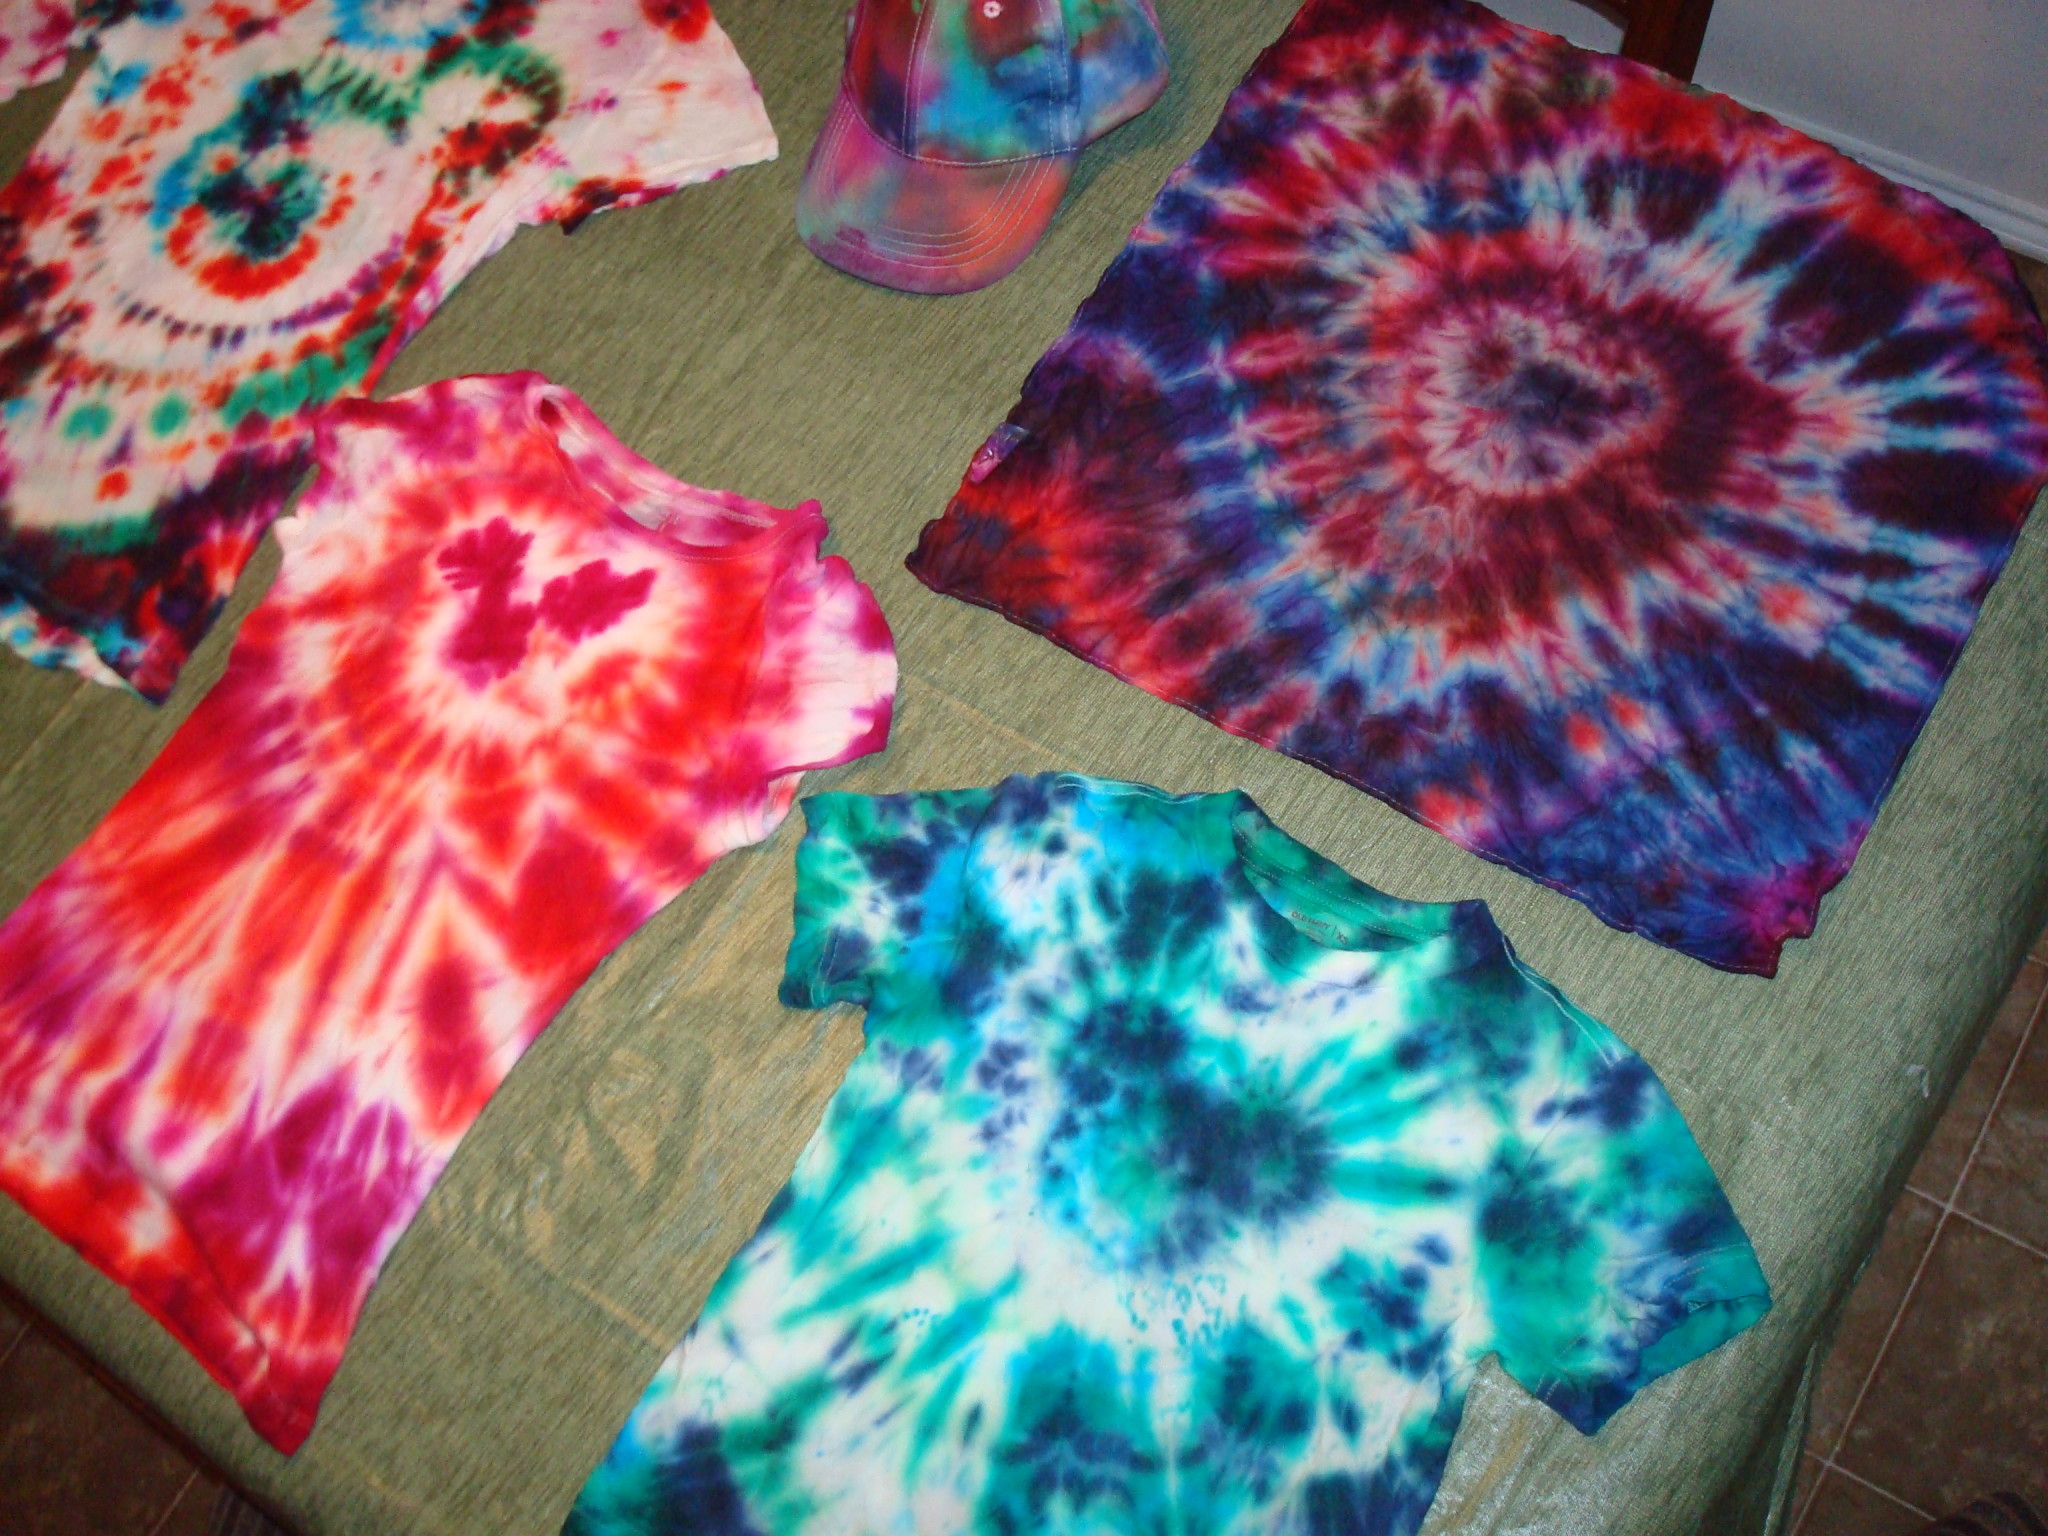 Mickey Mouse tie dye tshirts